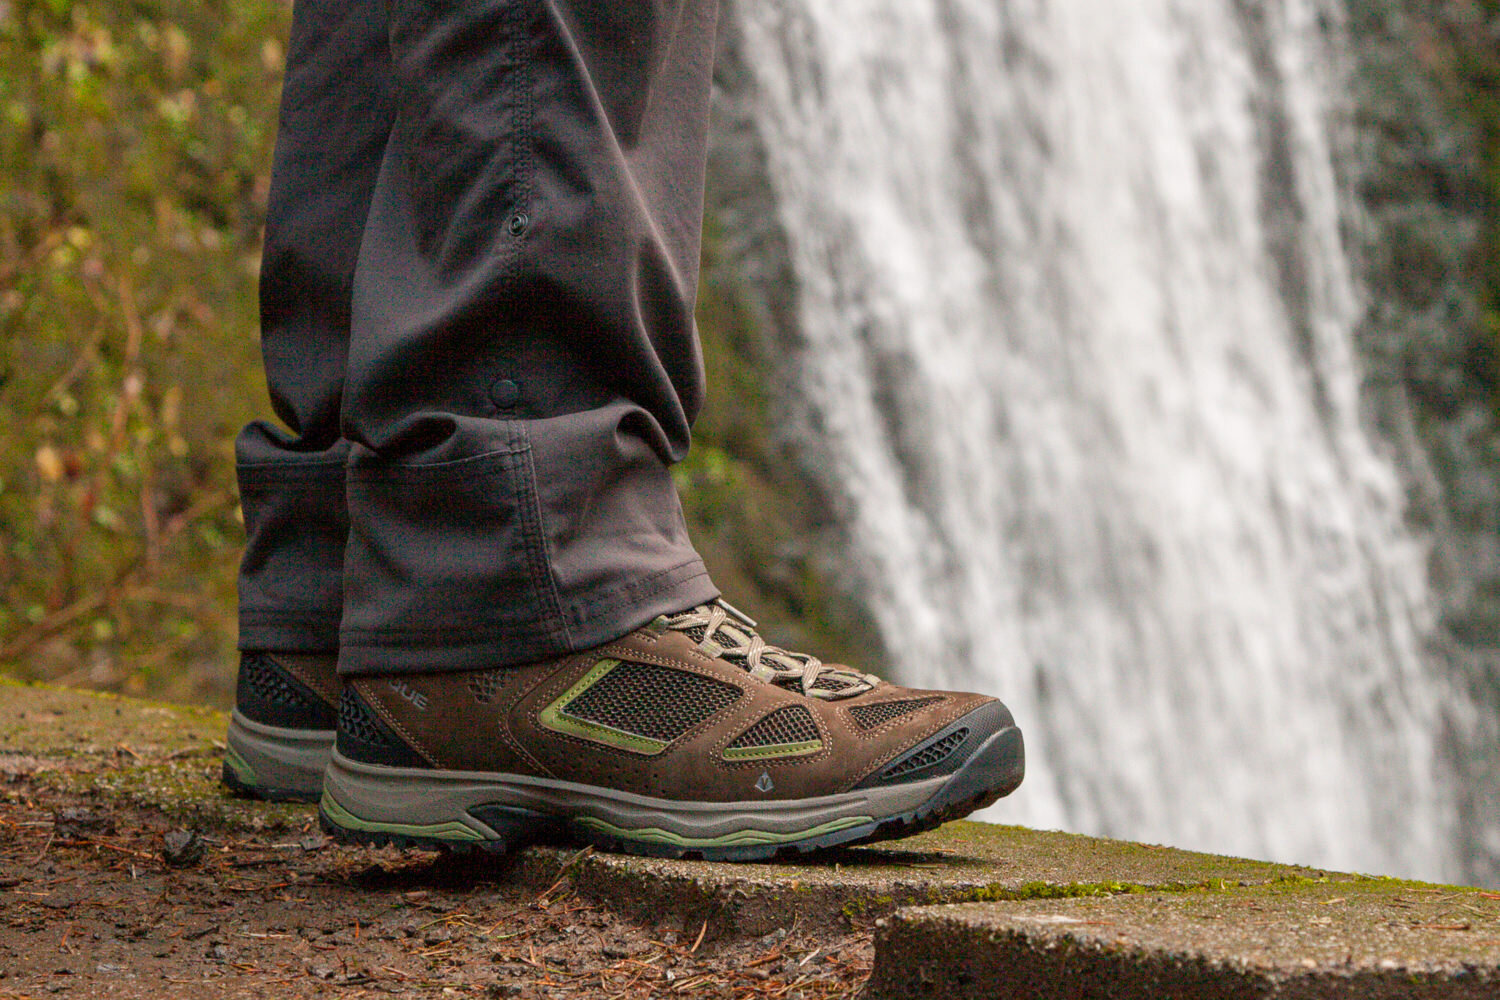 The Vasque Breeze AT Mid GTX Boots are durable, comfortable, and supportive